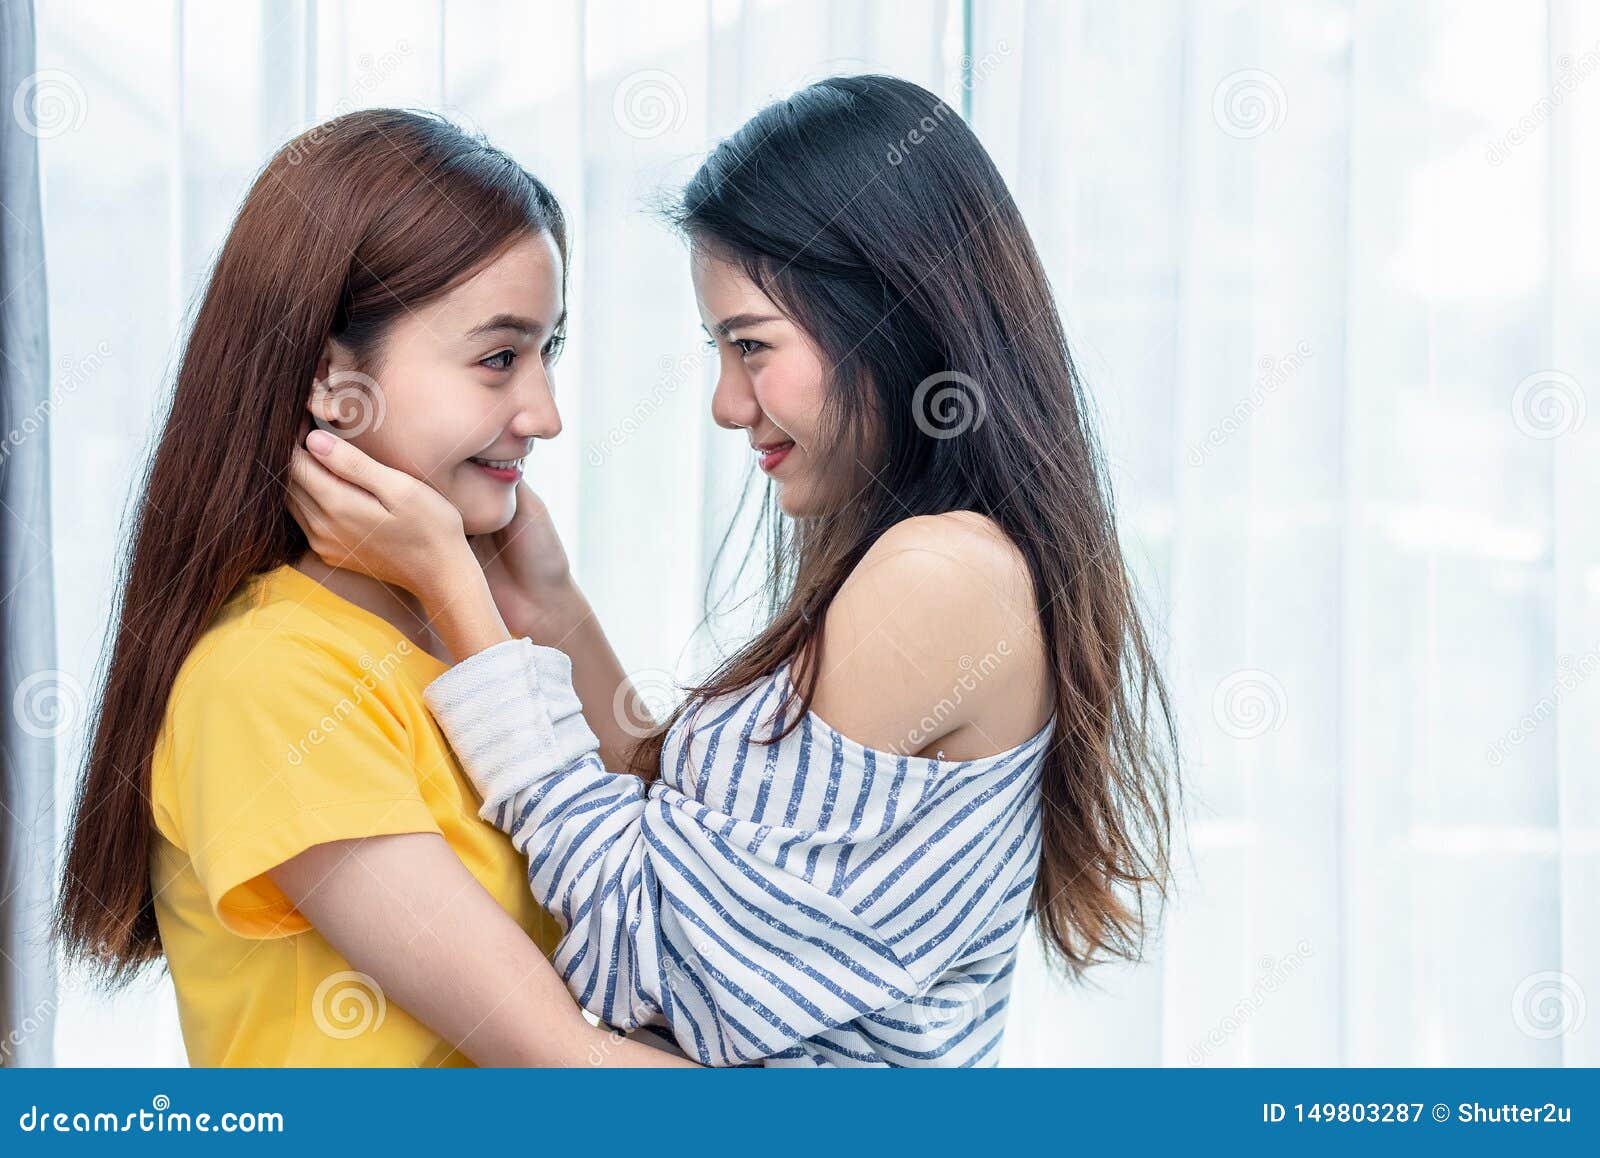 two asian women looking at each others in home. people and lifestyles concept.  lgbt pride and lesbian theme